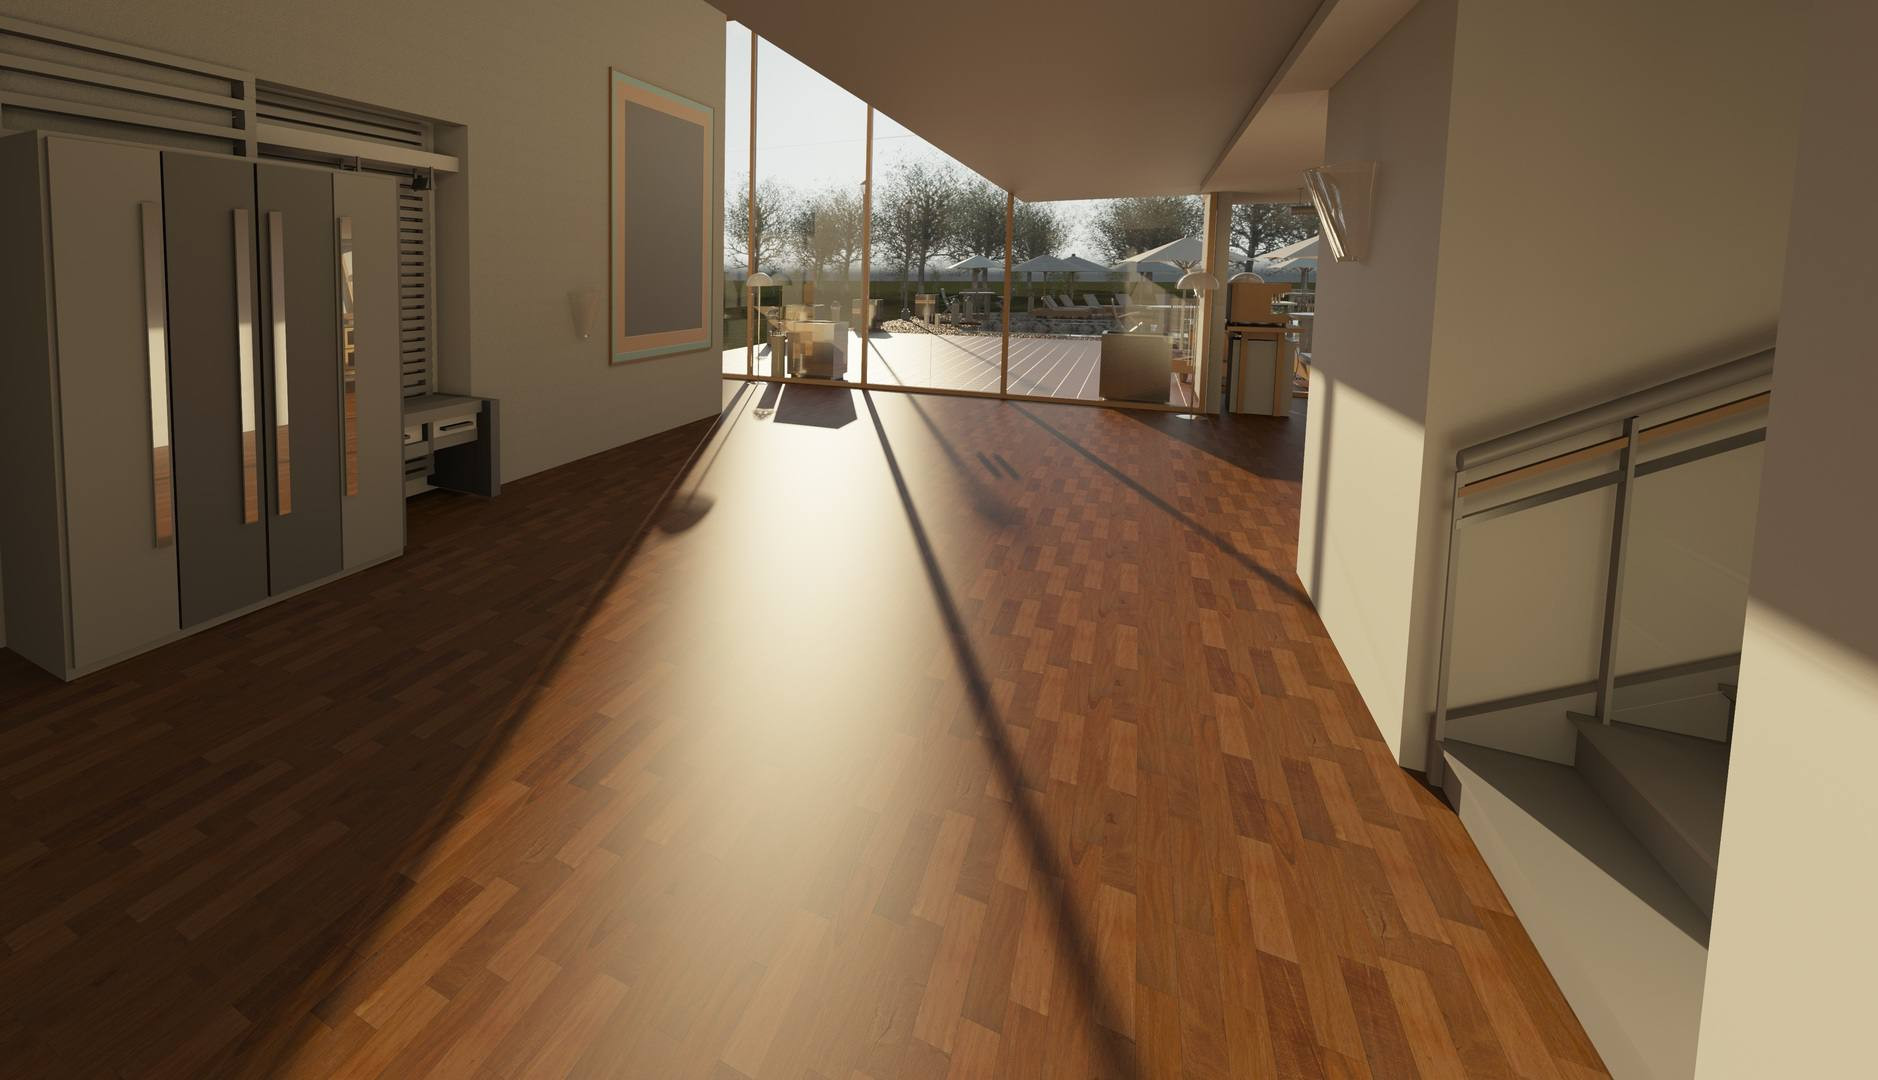 24 Lovely How to Finish Hardwood Floors Under Carpet 2023 free download how to finish hardwood floors under carpet of common flooring types currently used in renovation and building with architecture wood house floor interior window 917178 pxhere com 5ba27a2cc9e